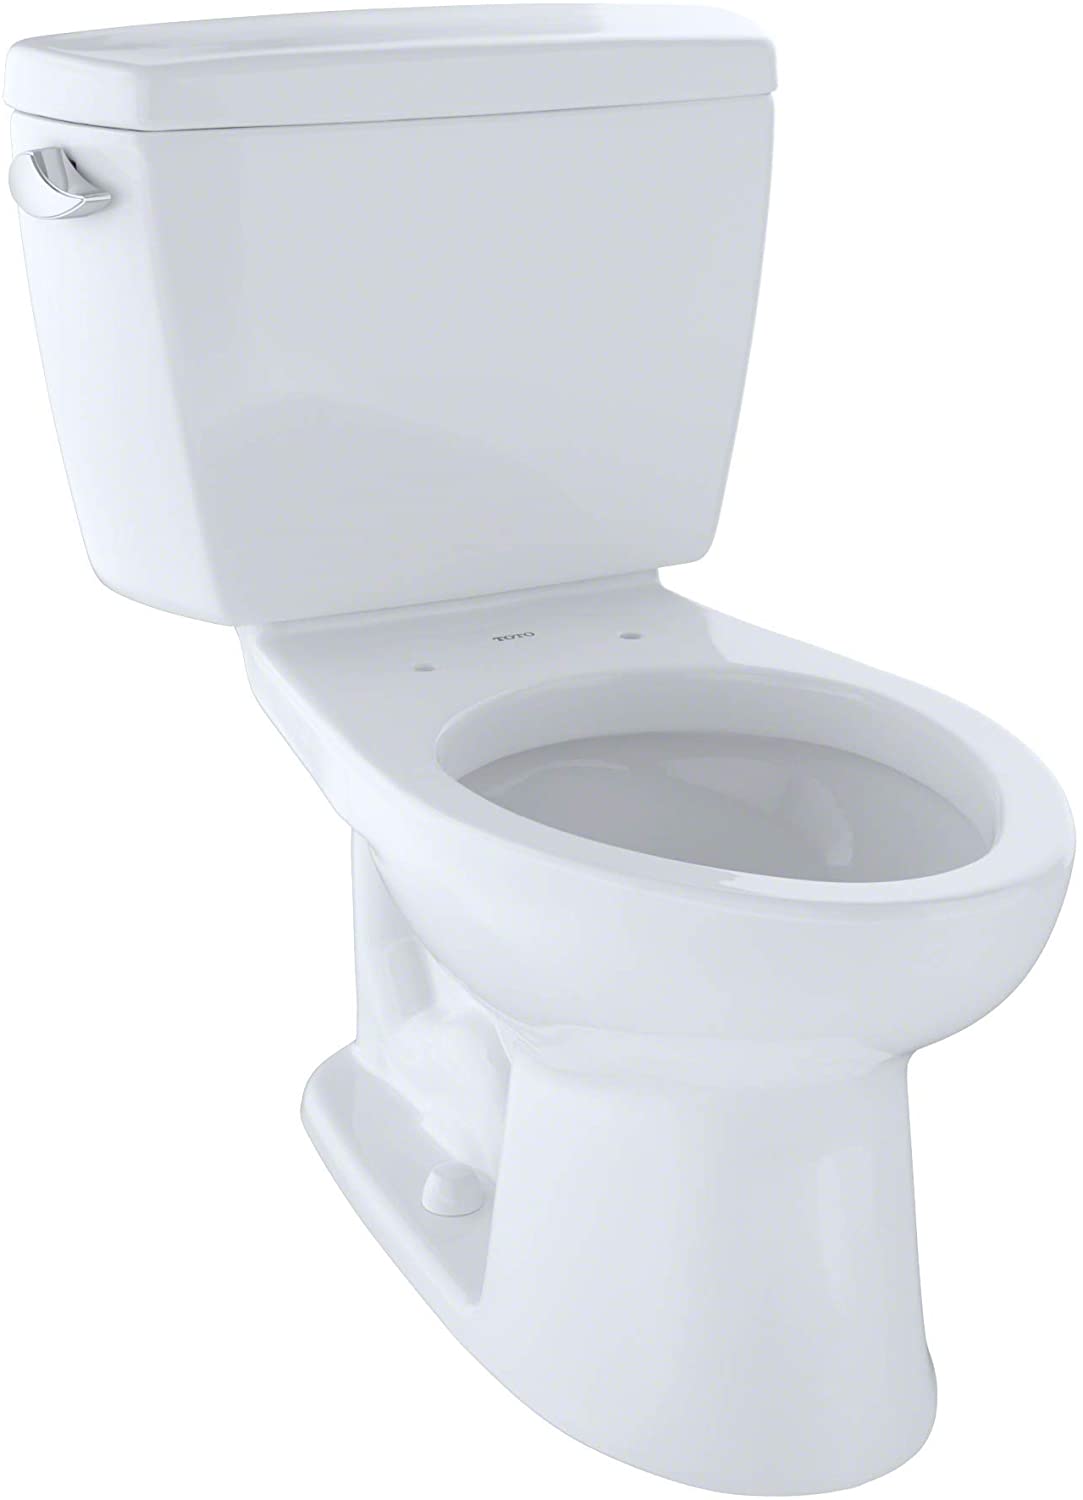 TOTO Drake 2-Piece ADA Toilet with Elongated Bowl